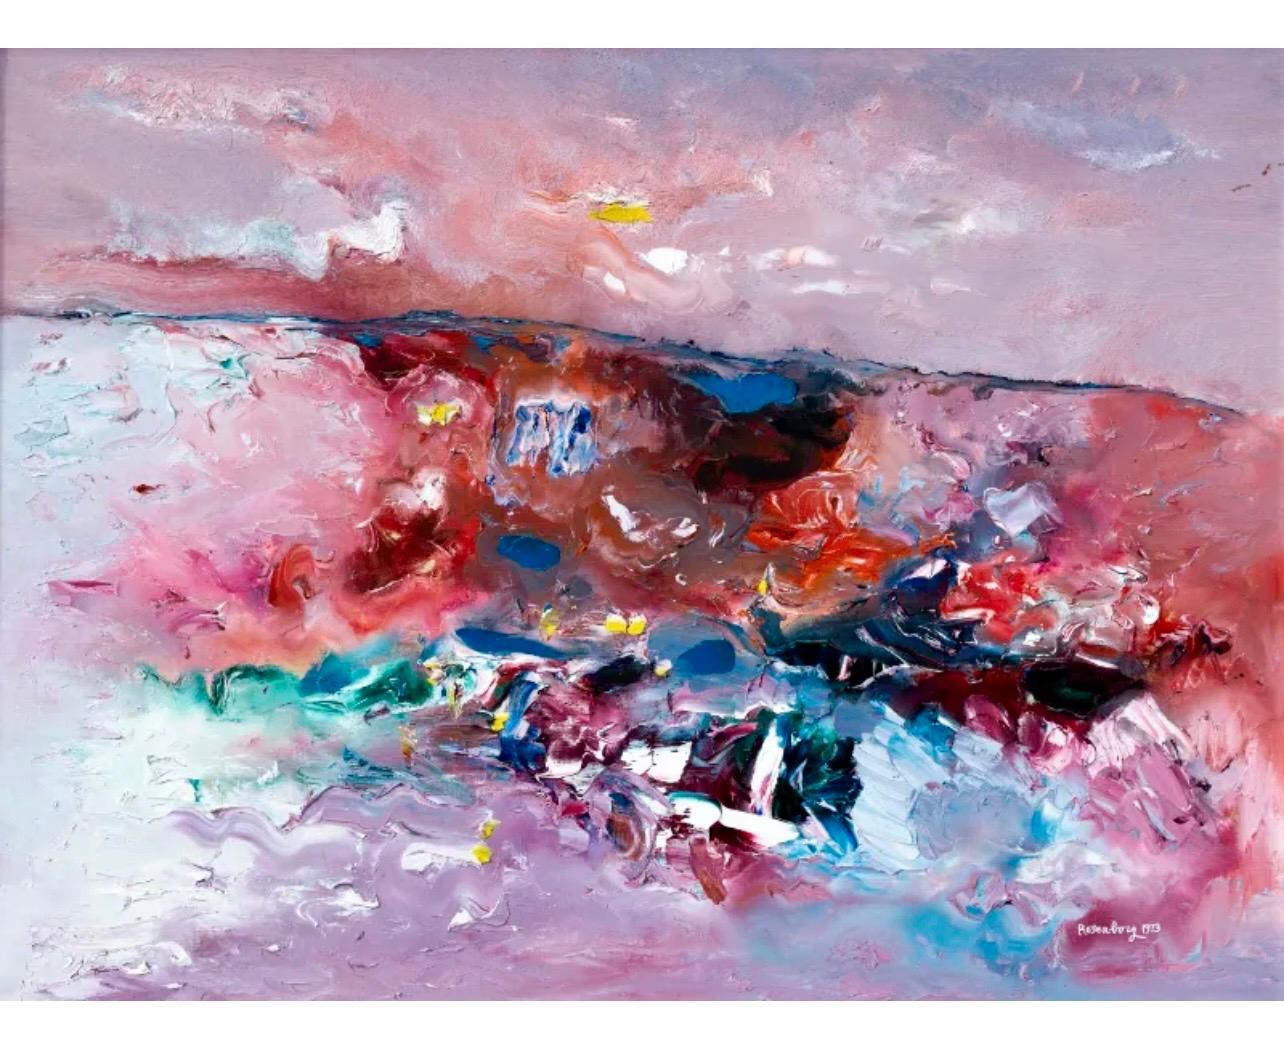 Ralph Rosenborg Figurative Painting - Large Colorful Abstract Expressionist Oil Painting Modernist Beach Landscape 